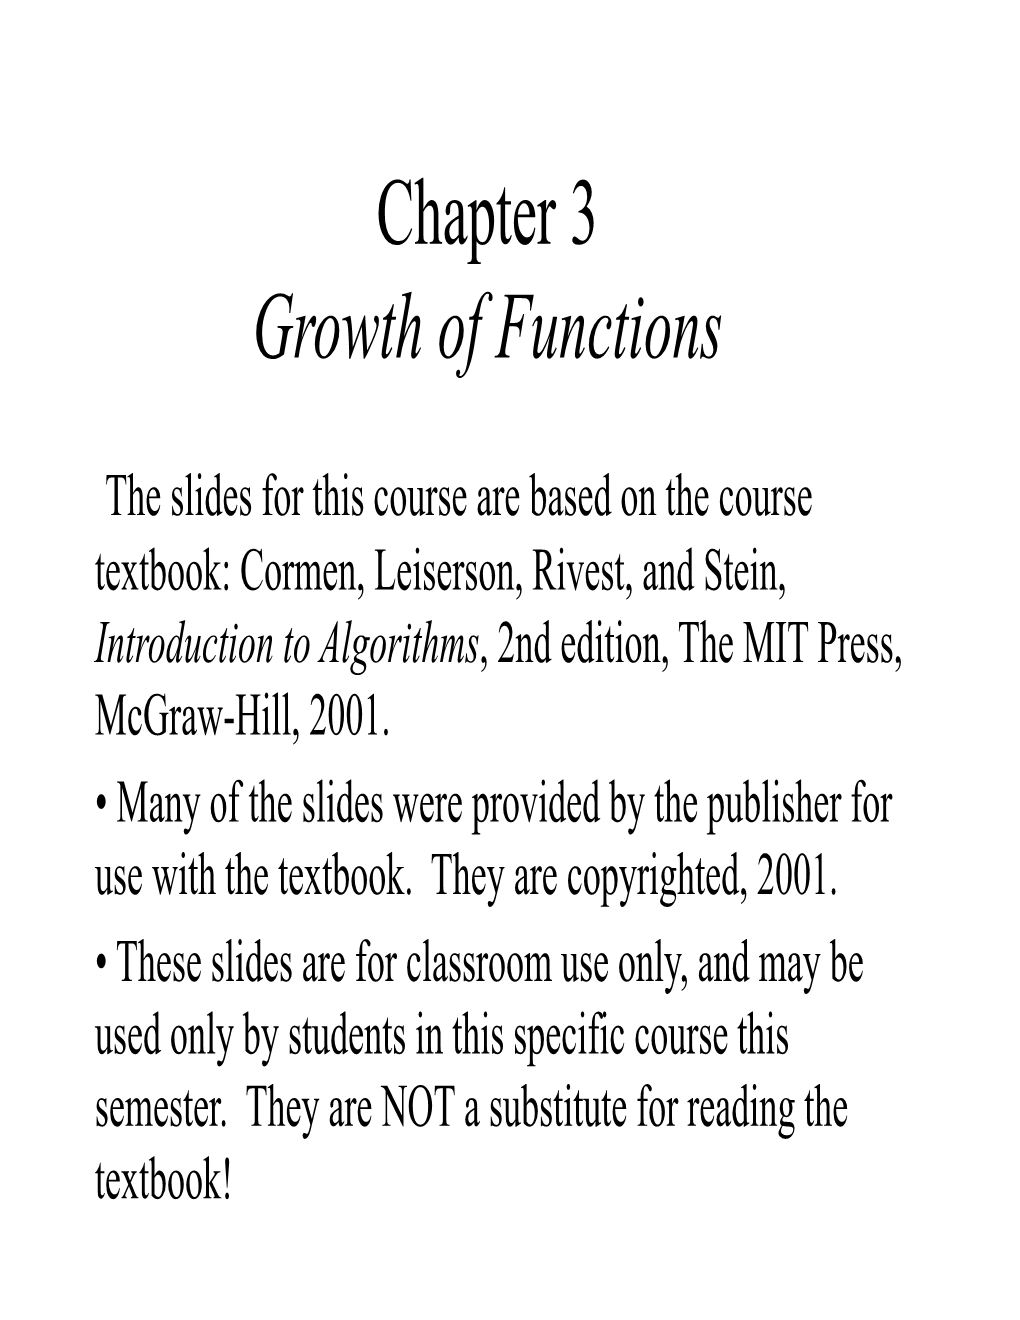 Chapter 3 Growth of Functions